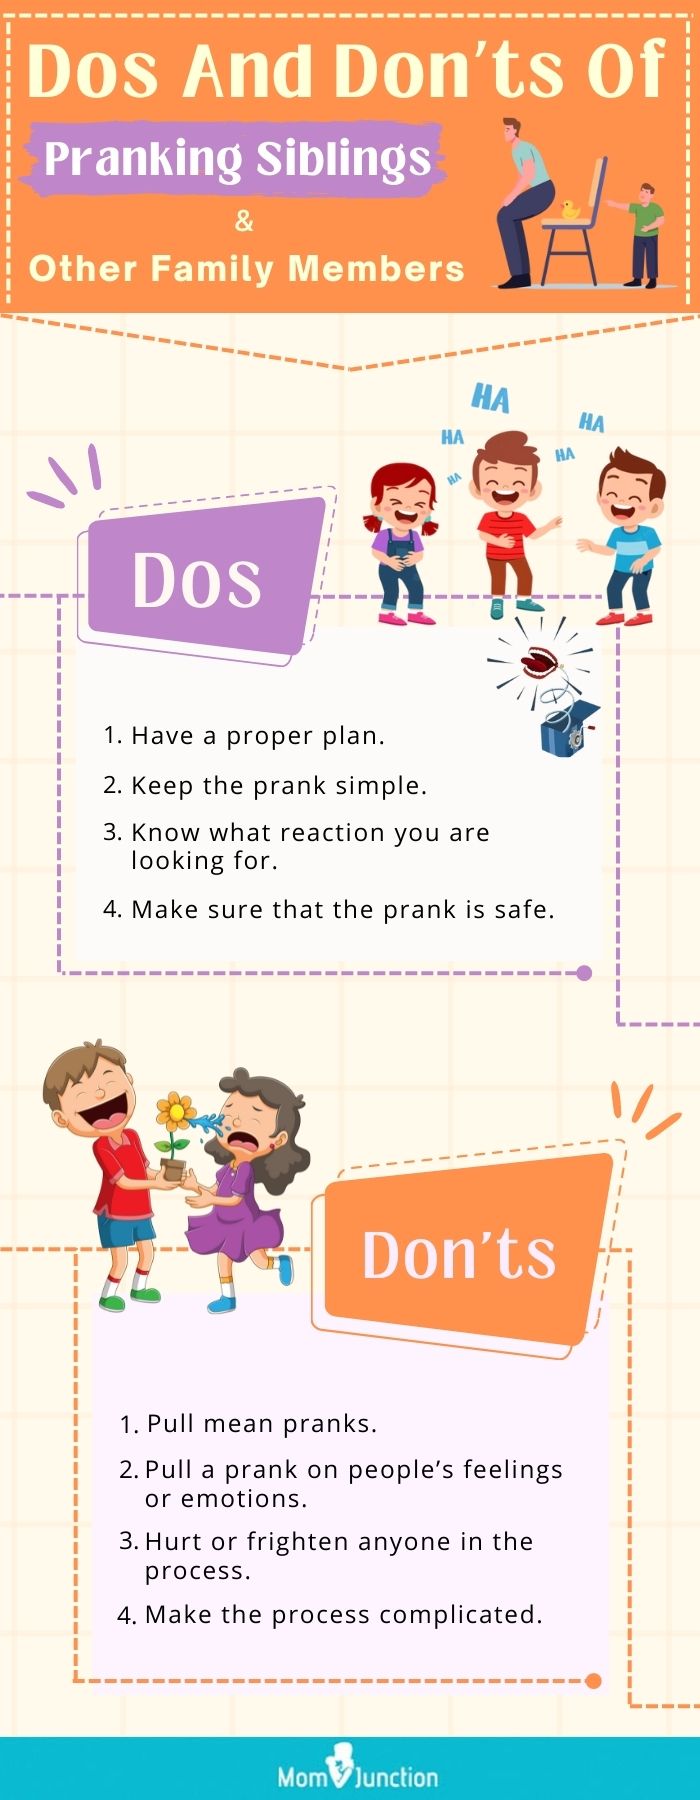 dos and don'ts of pranking siblings (infographic)